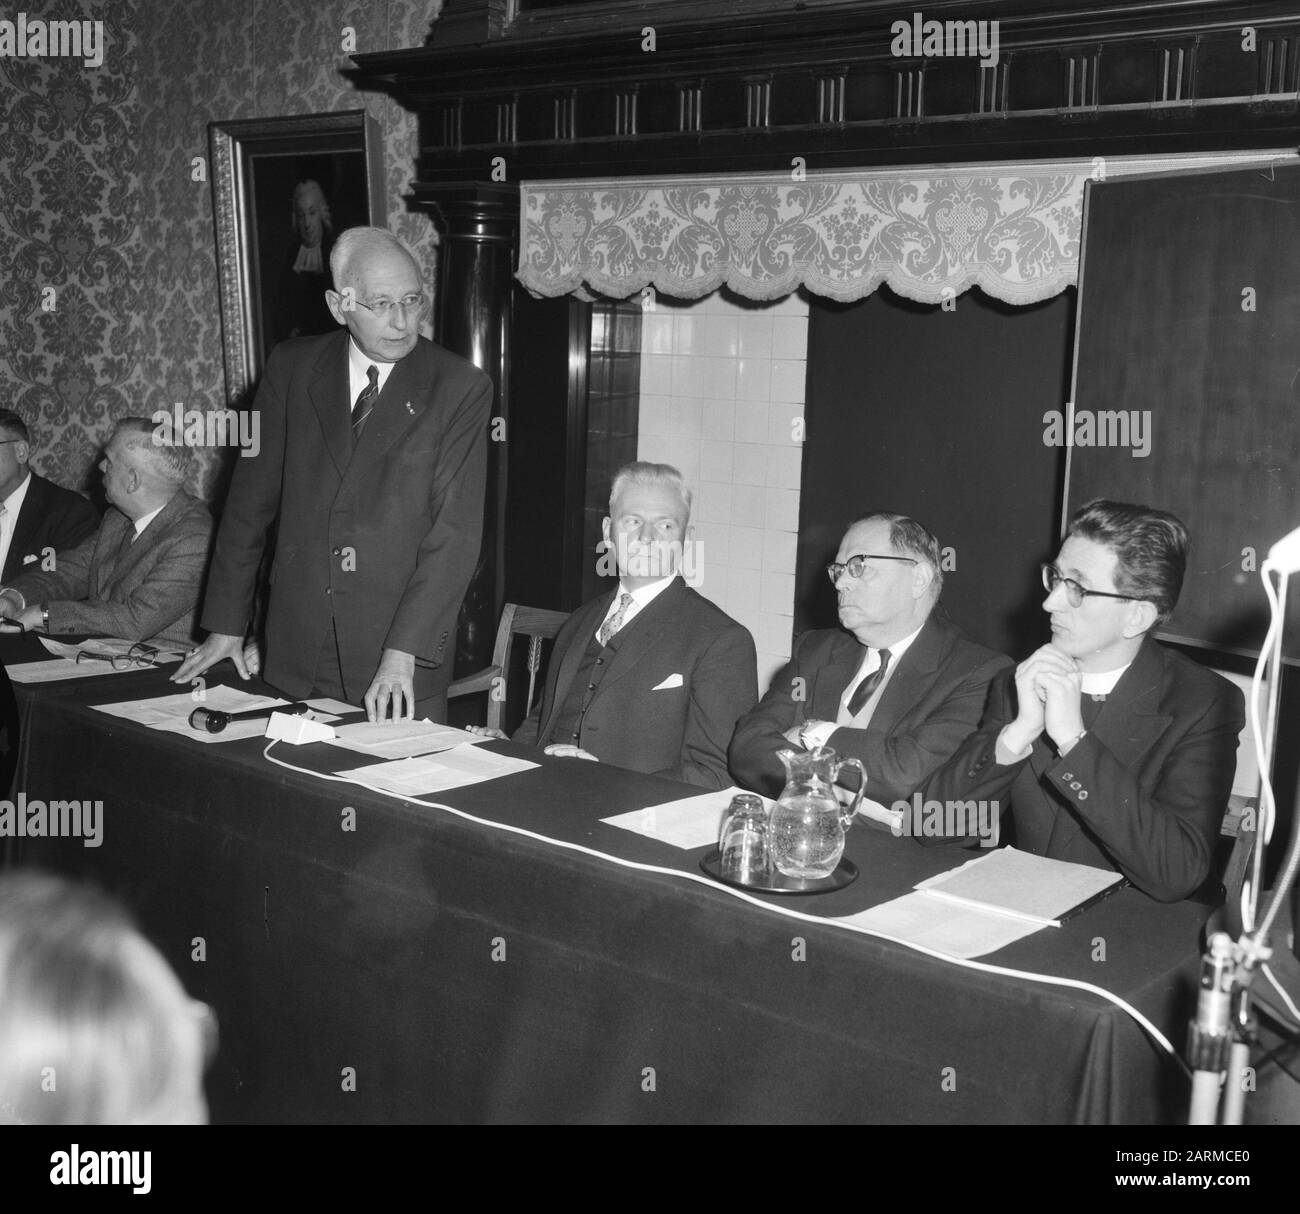 Symposium on Amsterdam and Rotterdam dialects in Amsterdam, v.l.n.r., pater J.J. Mittelmeijer, prof. dr. L.J. Rogier, dr. P.J. Meertens and [text aborted] Date: 2 January 1960 Location: Amsterdam, Noord-Holland Keywords: DIALECTES, SYMPOSIA Personal name: Meertens, P.J., Mittelmeijer, J.J., Rogier, L.J. Stock Photo